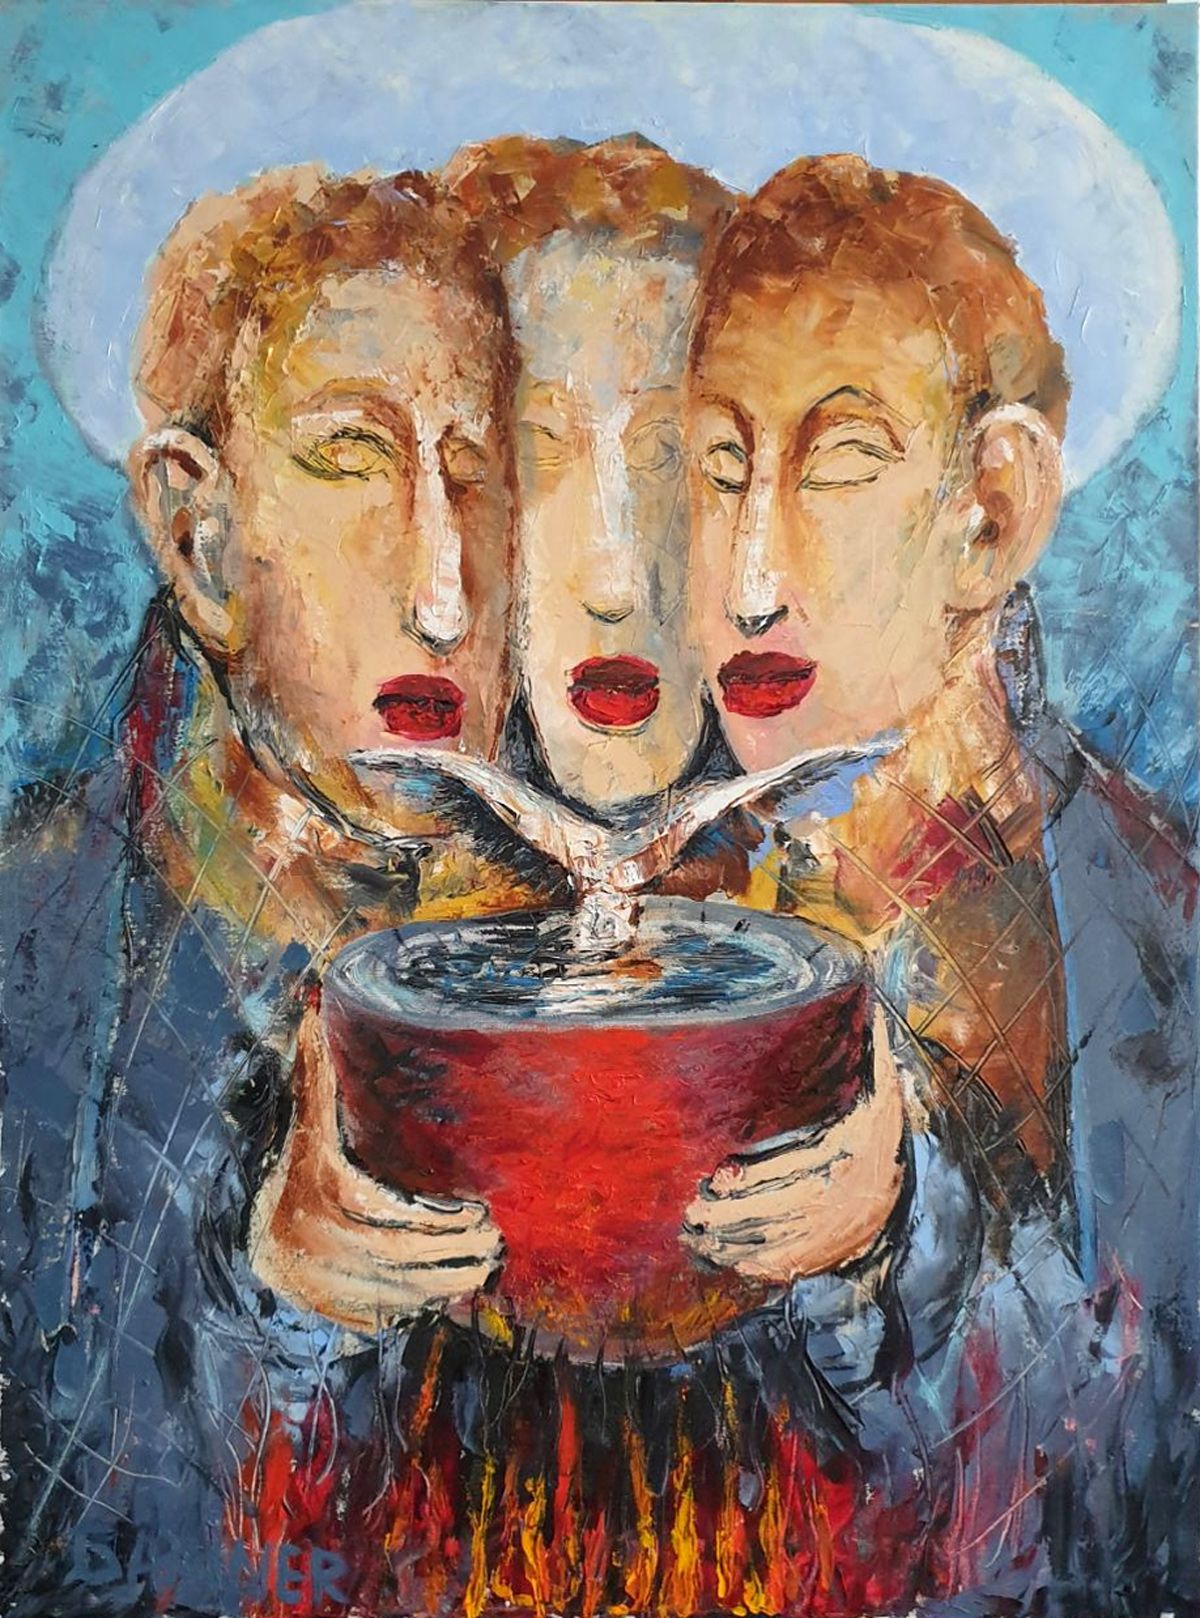 Contemporary painting. Painting in an expressive manner. Three singers